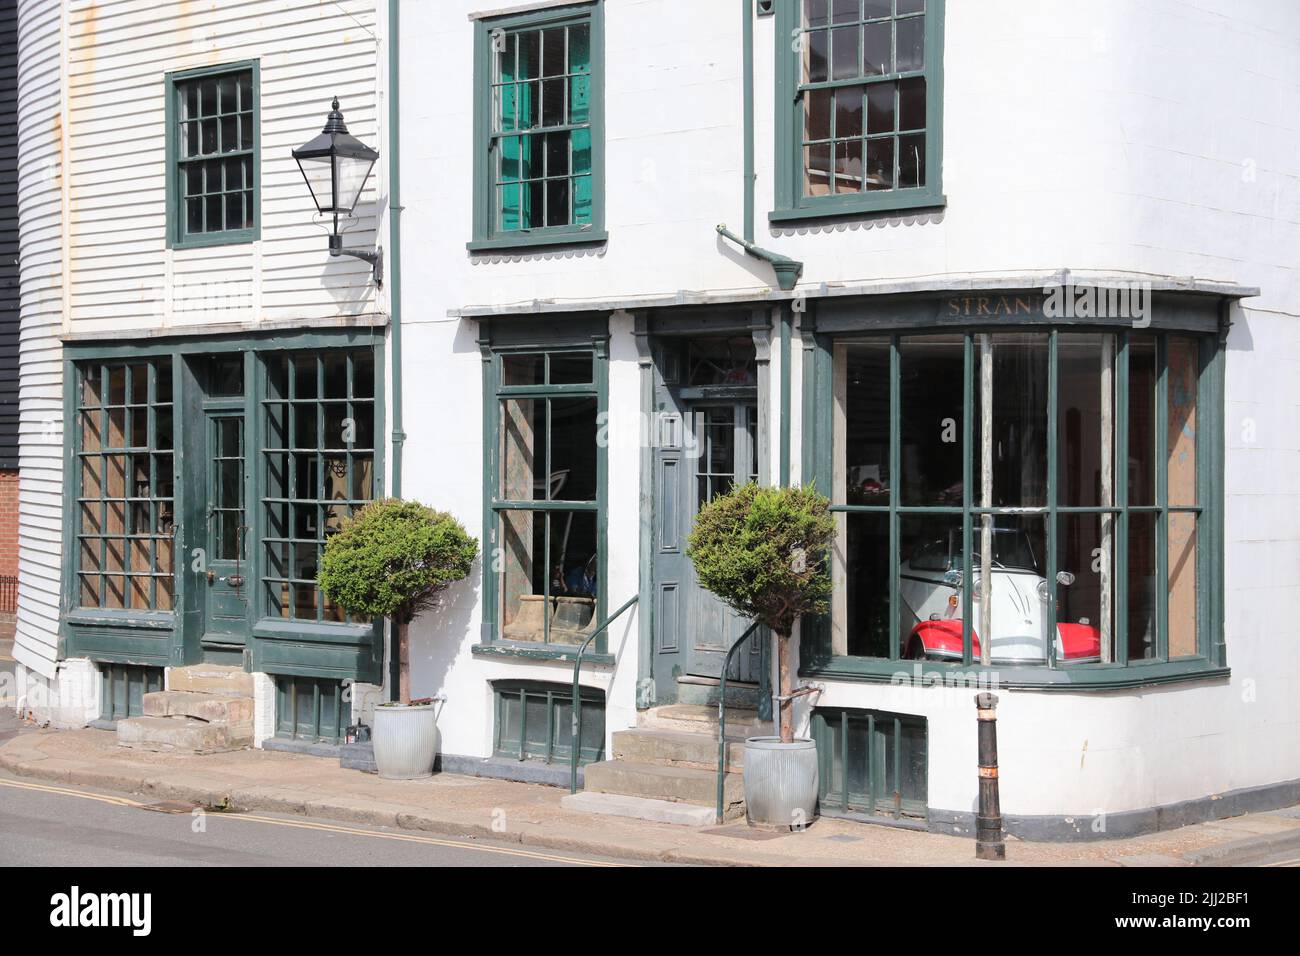 STRAND HOUSE IN RYE IN THE UK THAT WAS USED AS COOPER'S BOOKS AND LACIE'S IN THE NETFLIX TV SHOW RED BOOK STARRING AARON PAUL Stock Photo